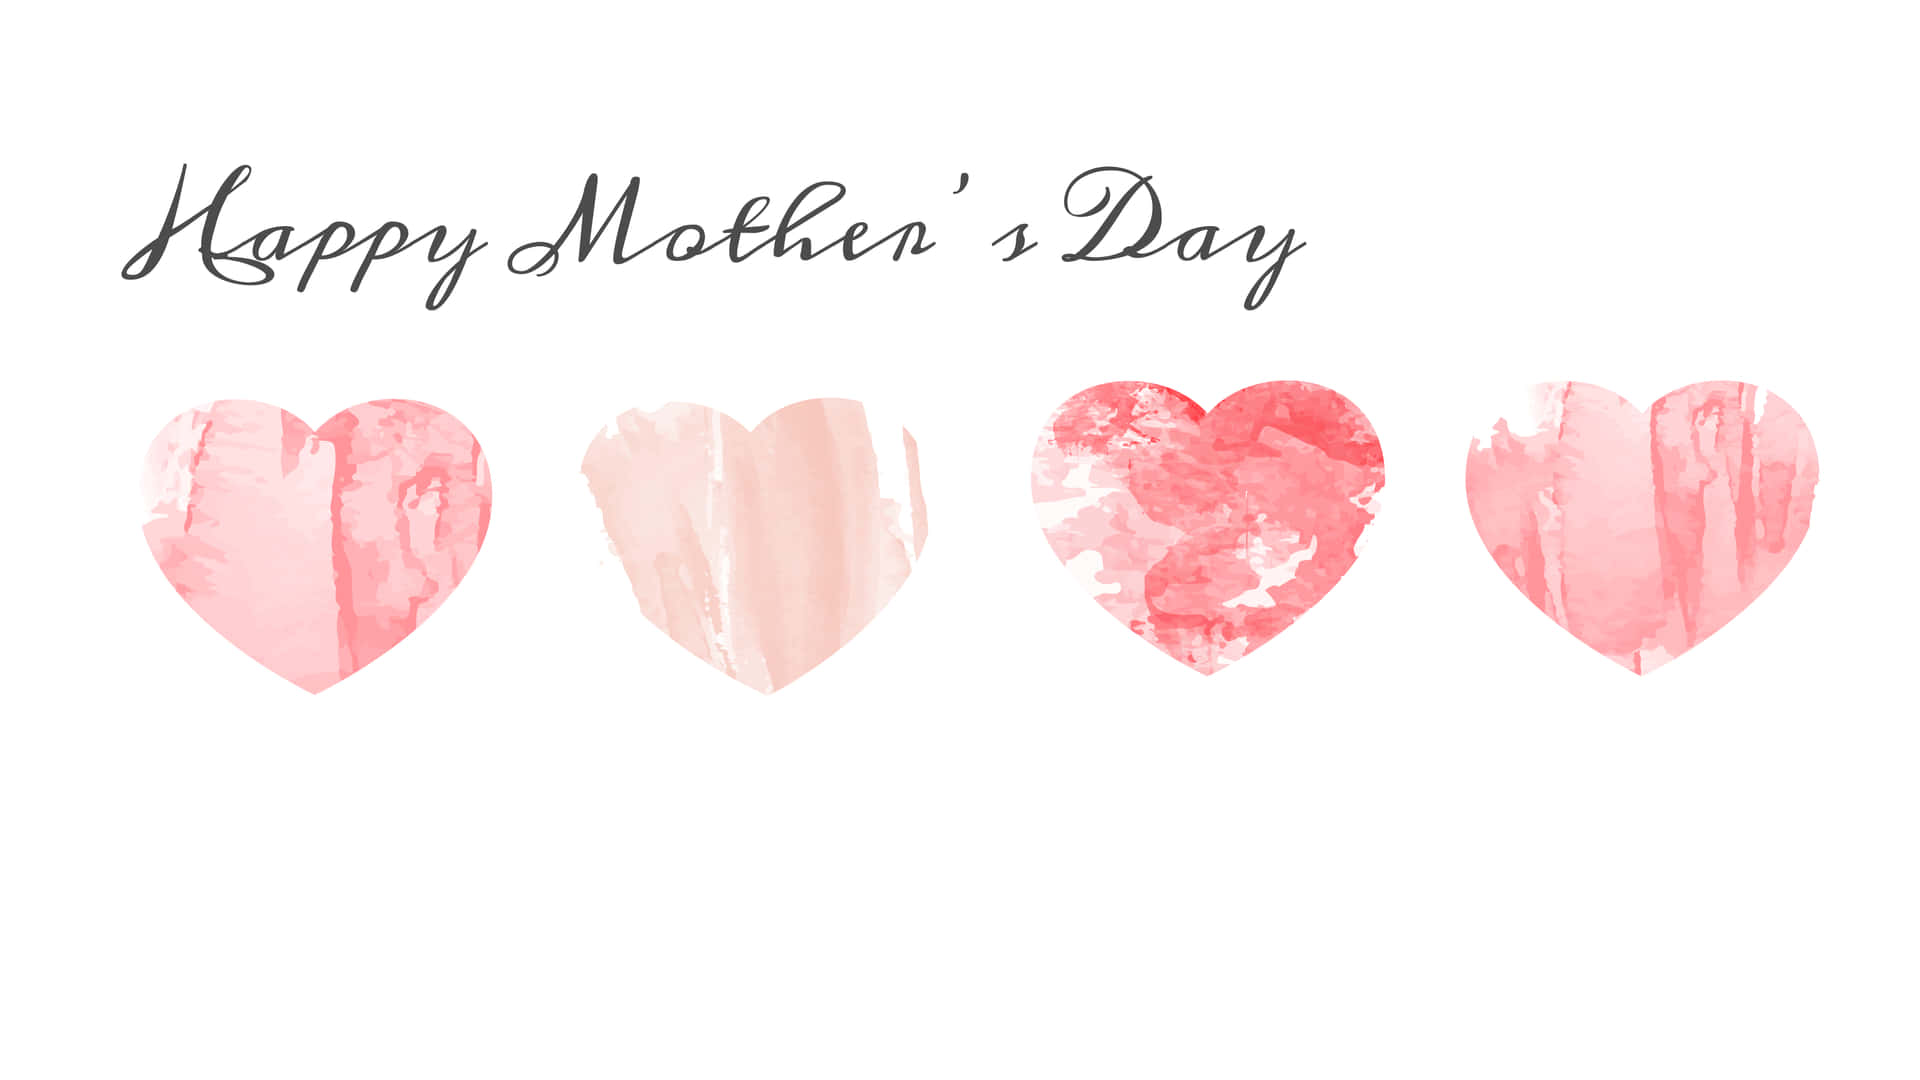 Share the love this Mothers Day